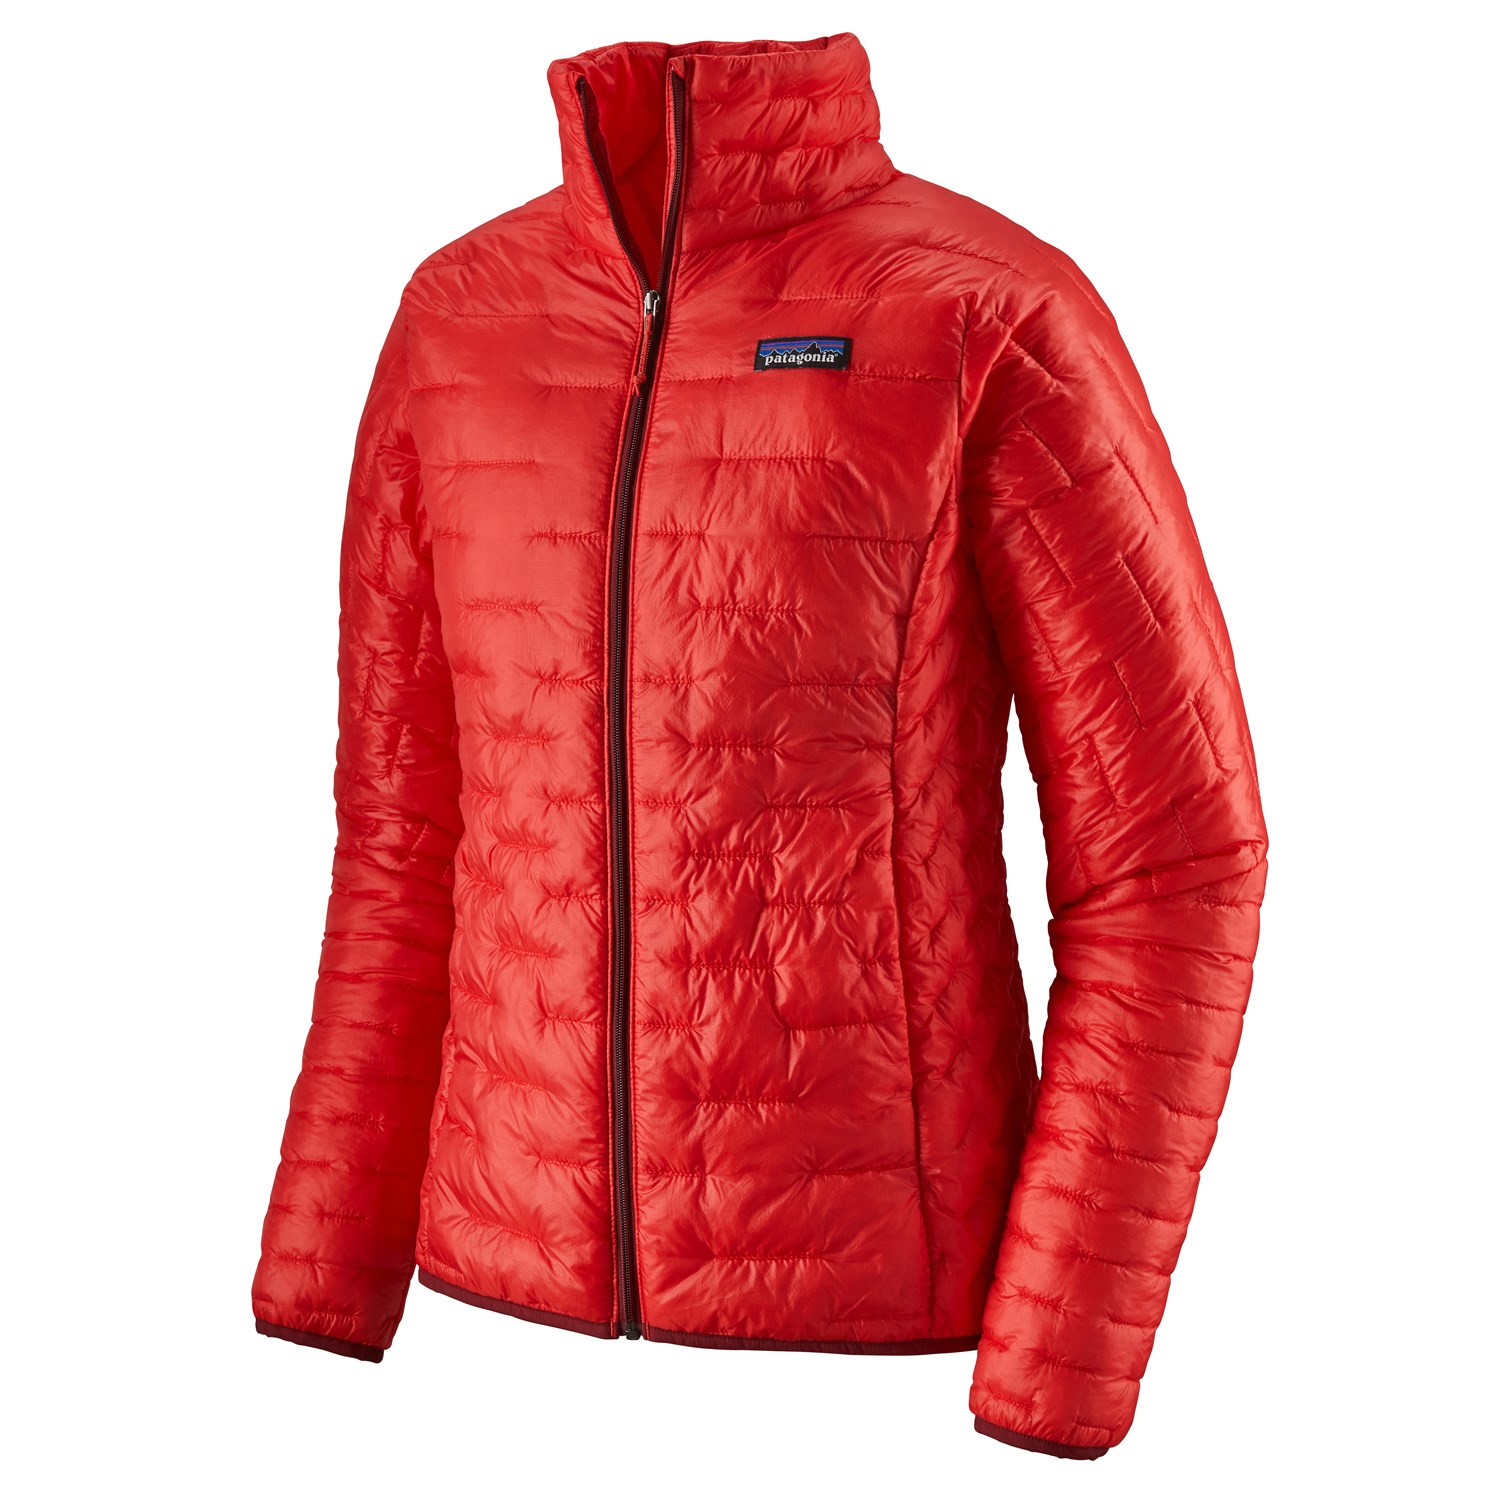 Patagonia Micro Puff Jacket - Synthetic jacket Women's